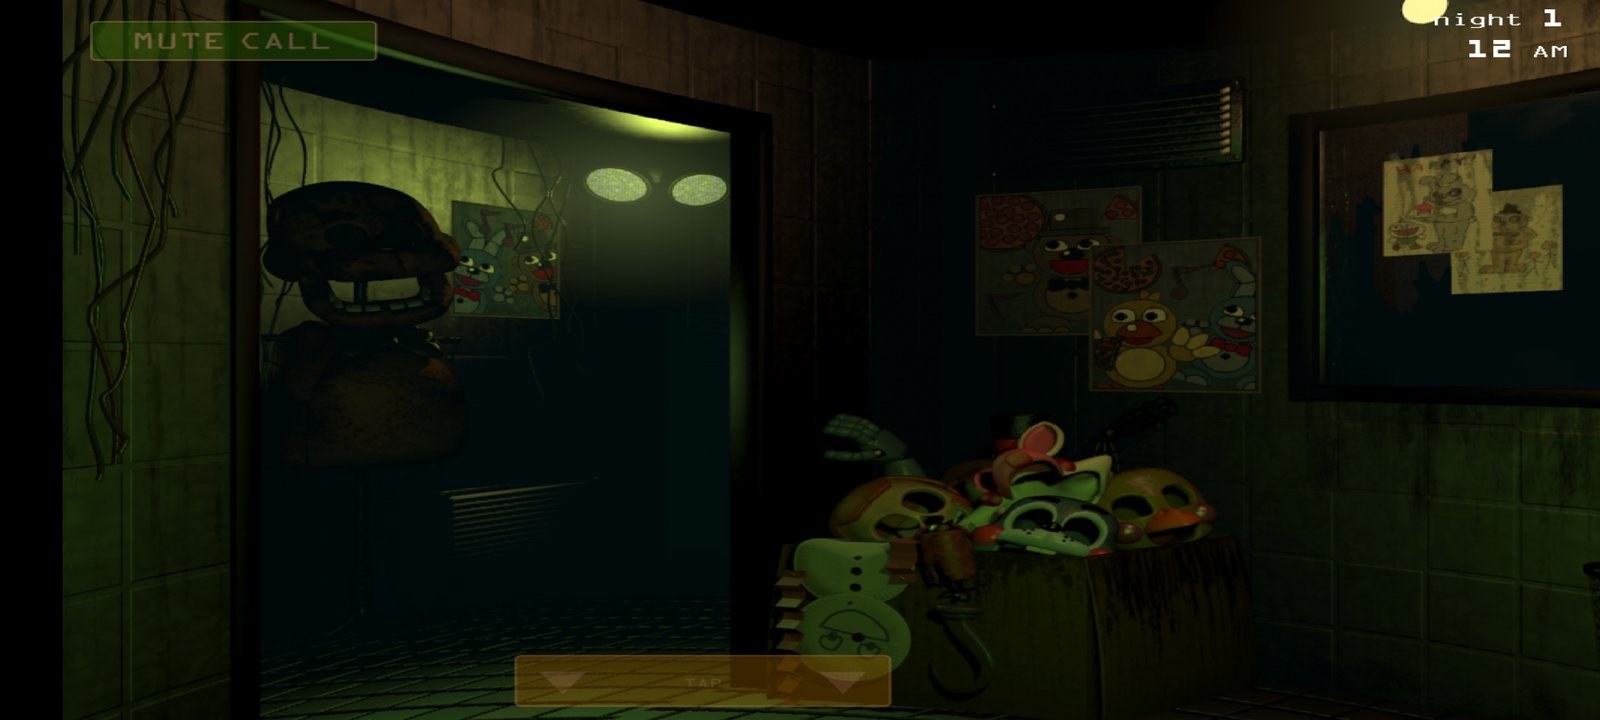 Download Five Nights at Freddy's 2 (Unlocked) 2.0.4.mod APK For